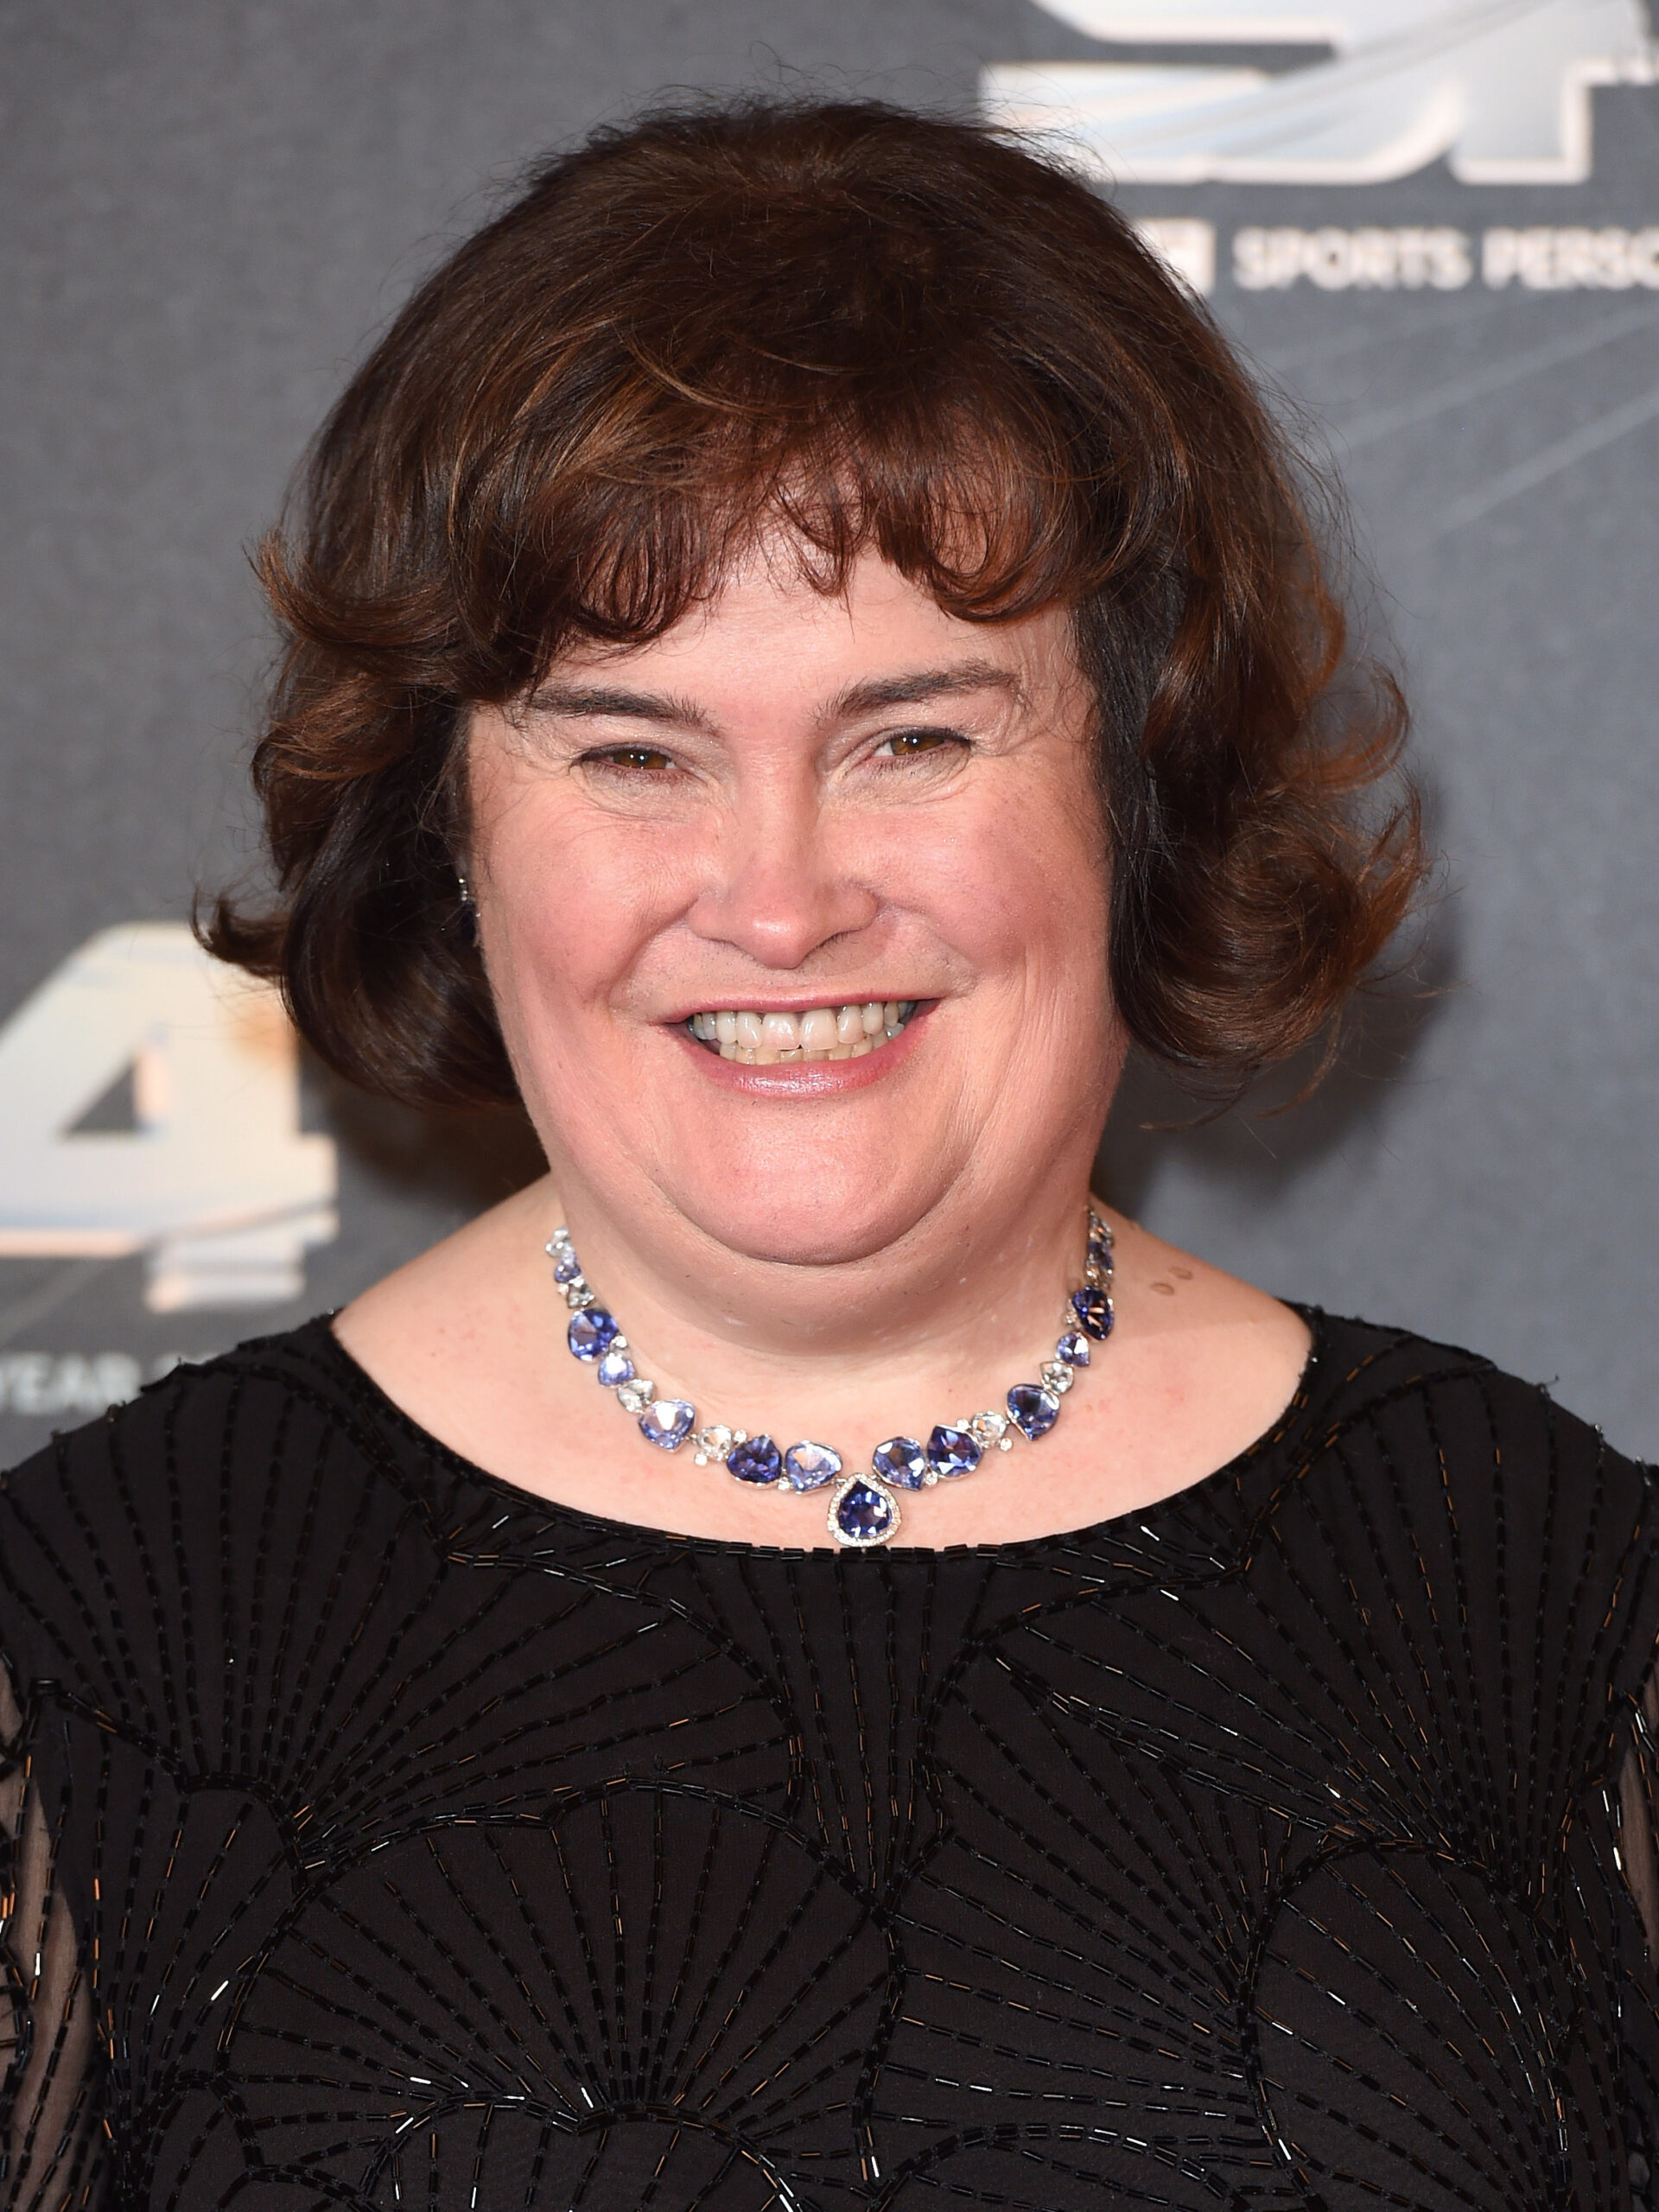 Susan Boyle tormented by teens in abuse campaign